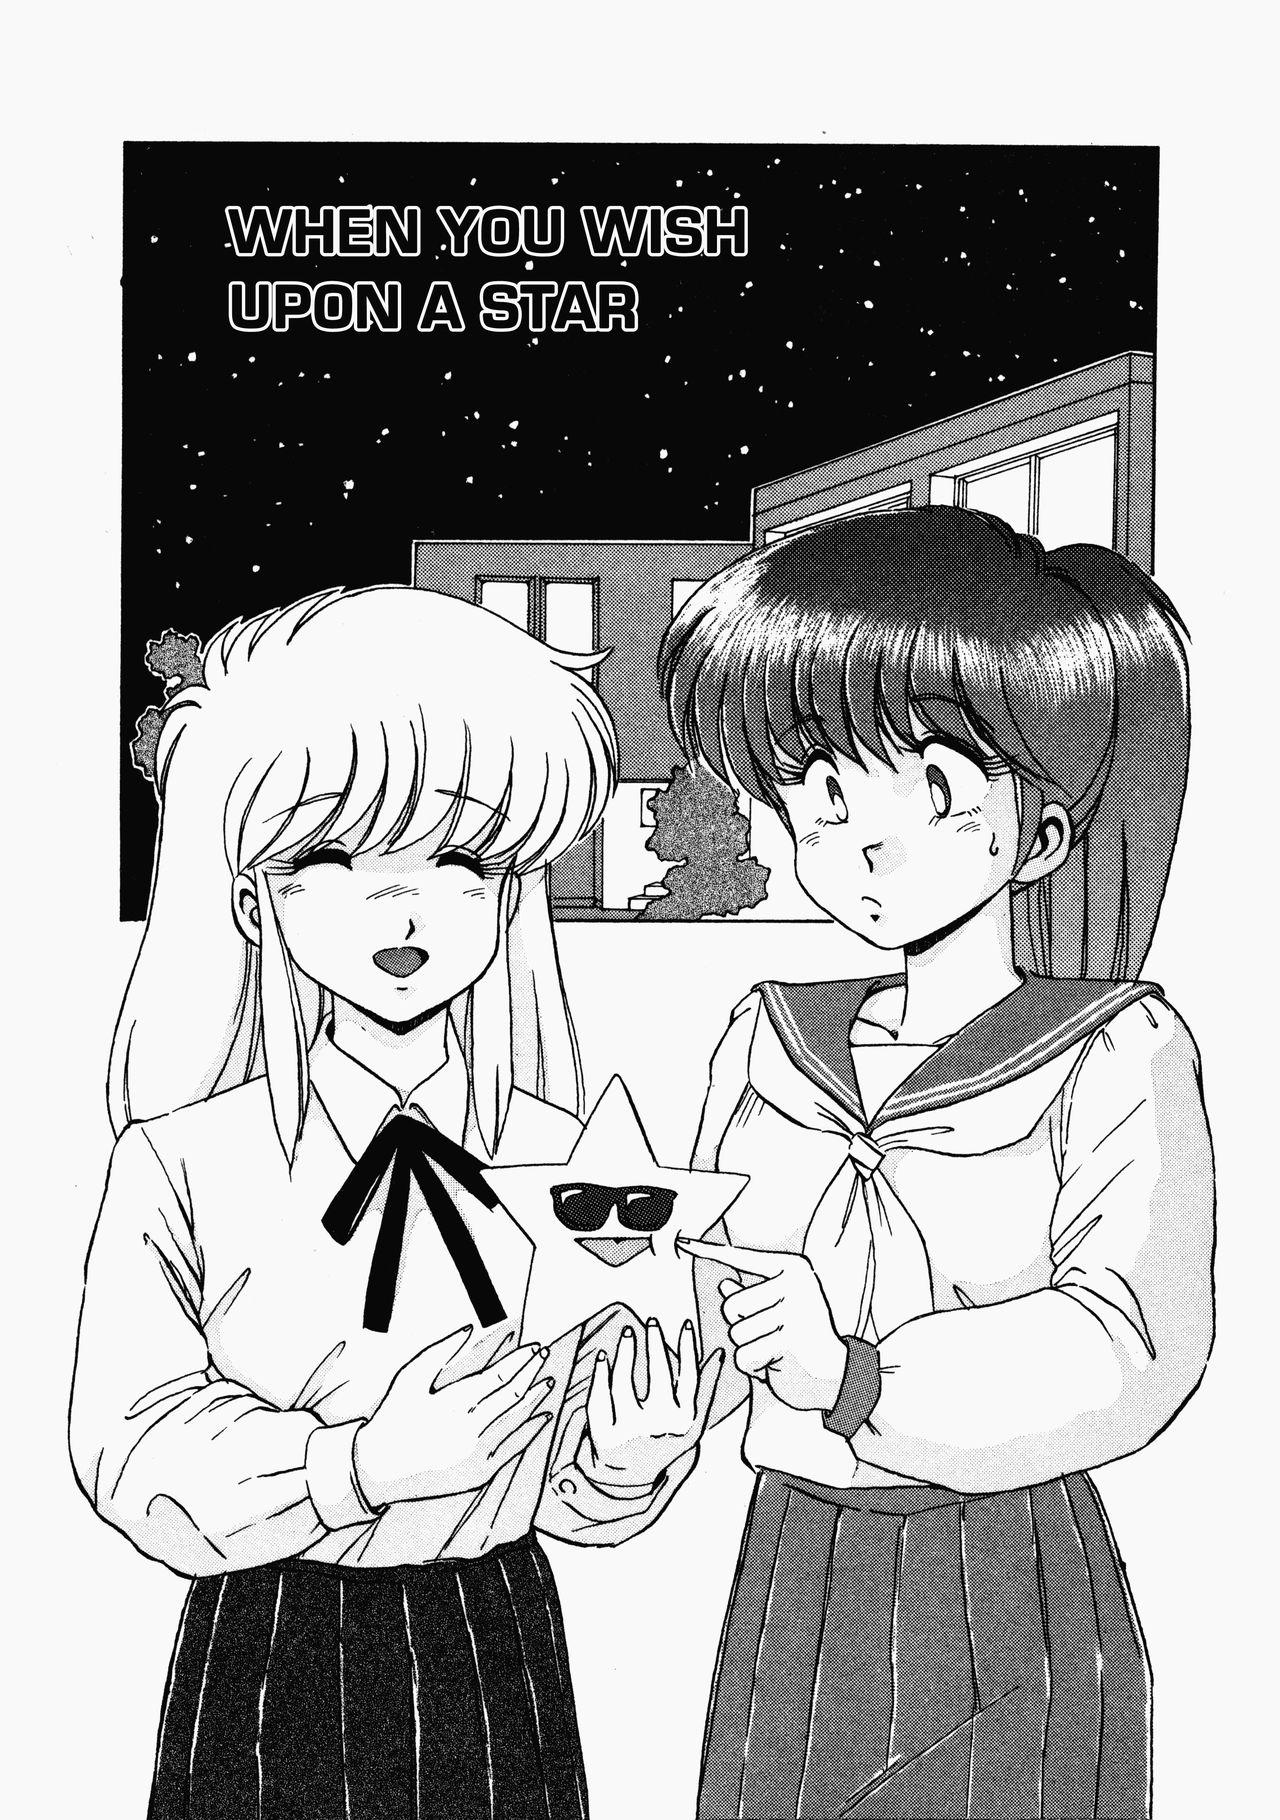 Homosexual Happening STAR prologue + Act 1 - 3 Ikillitts - Page 5